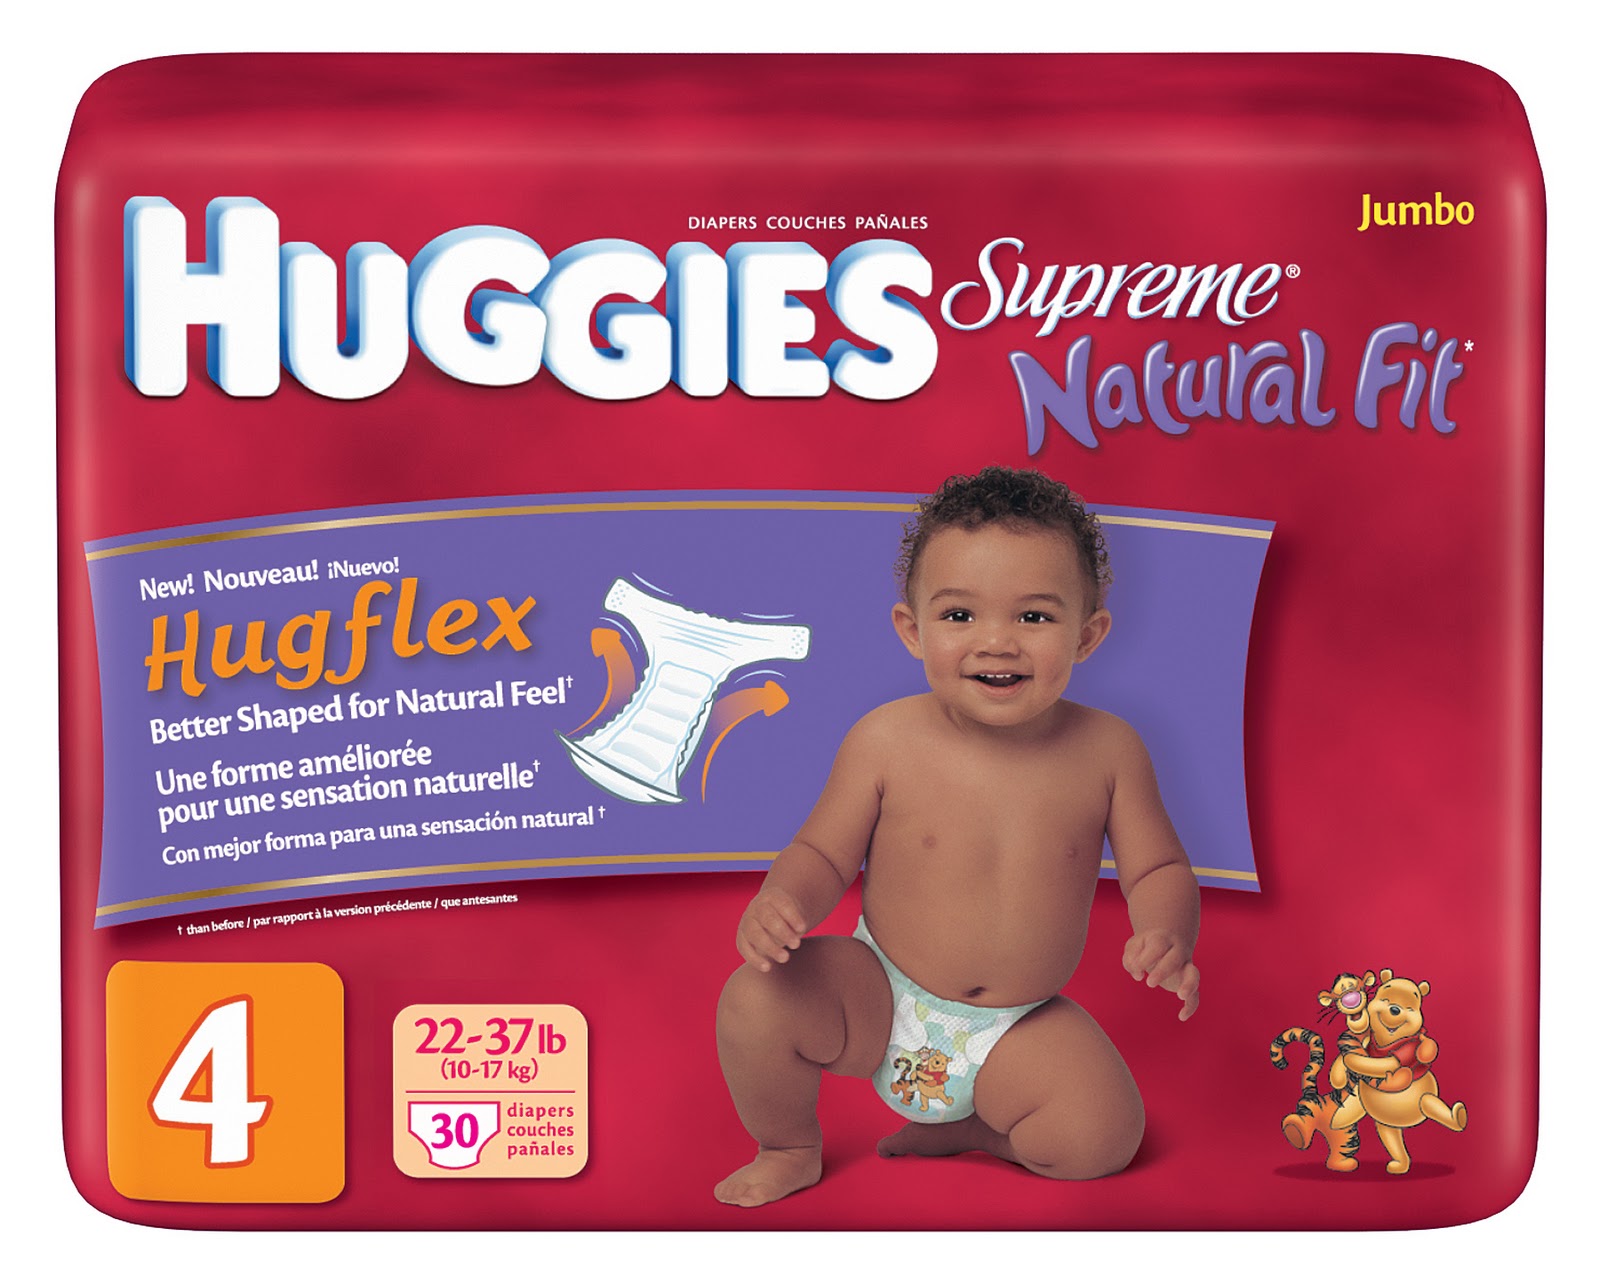 Spend Freely Huggies New 2.00 Off Coupons + Walgreens Deal!